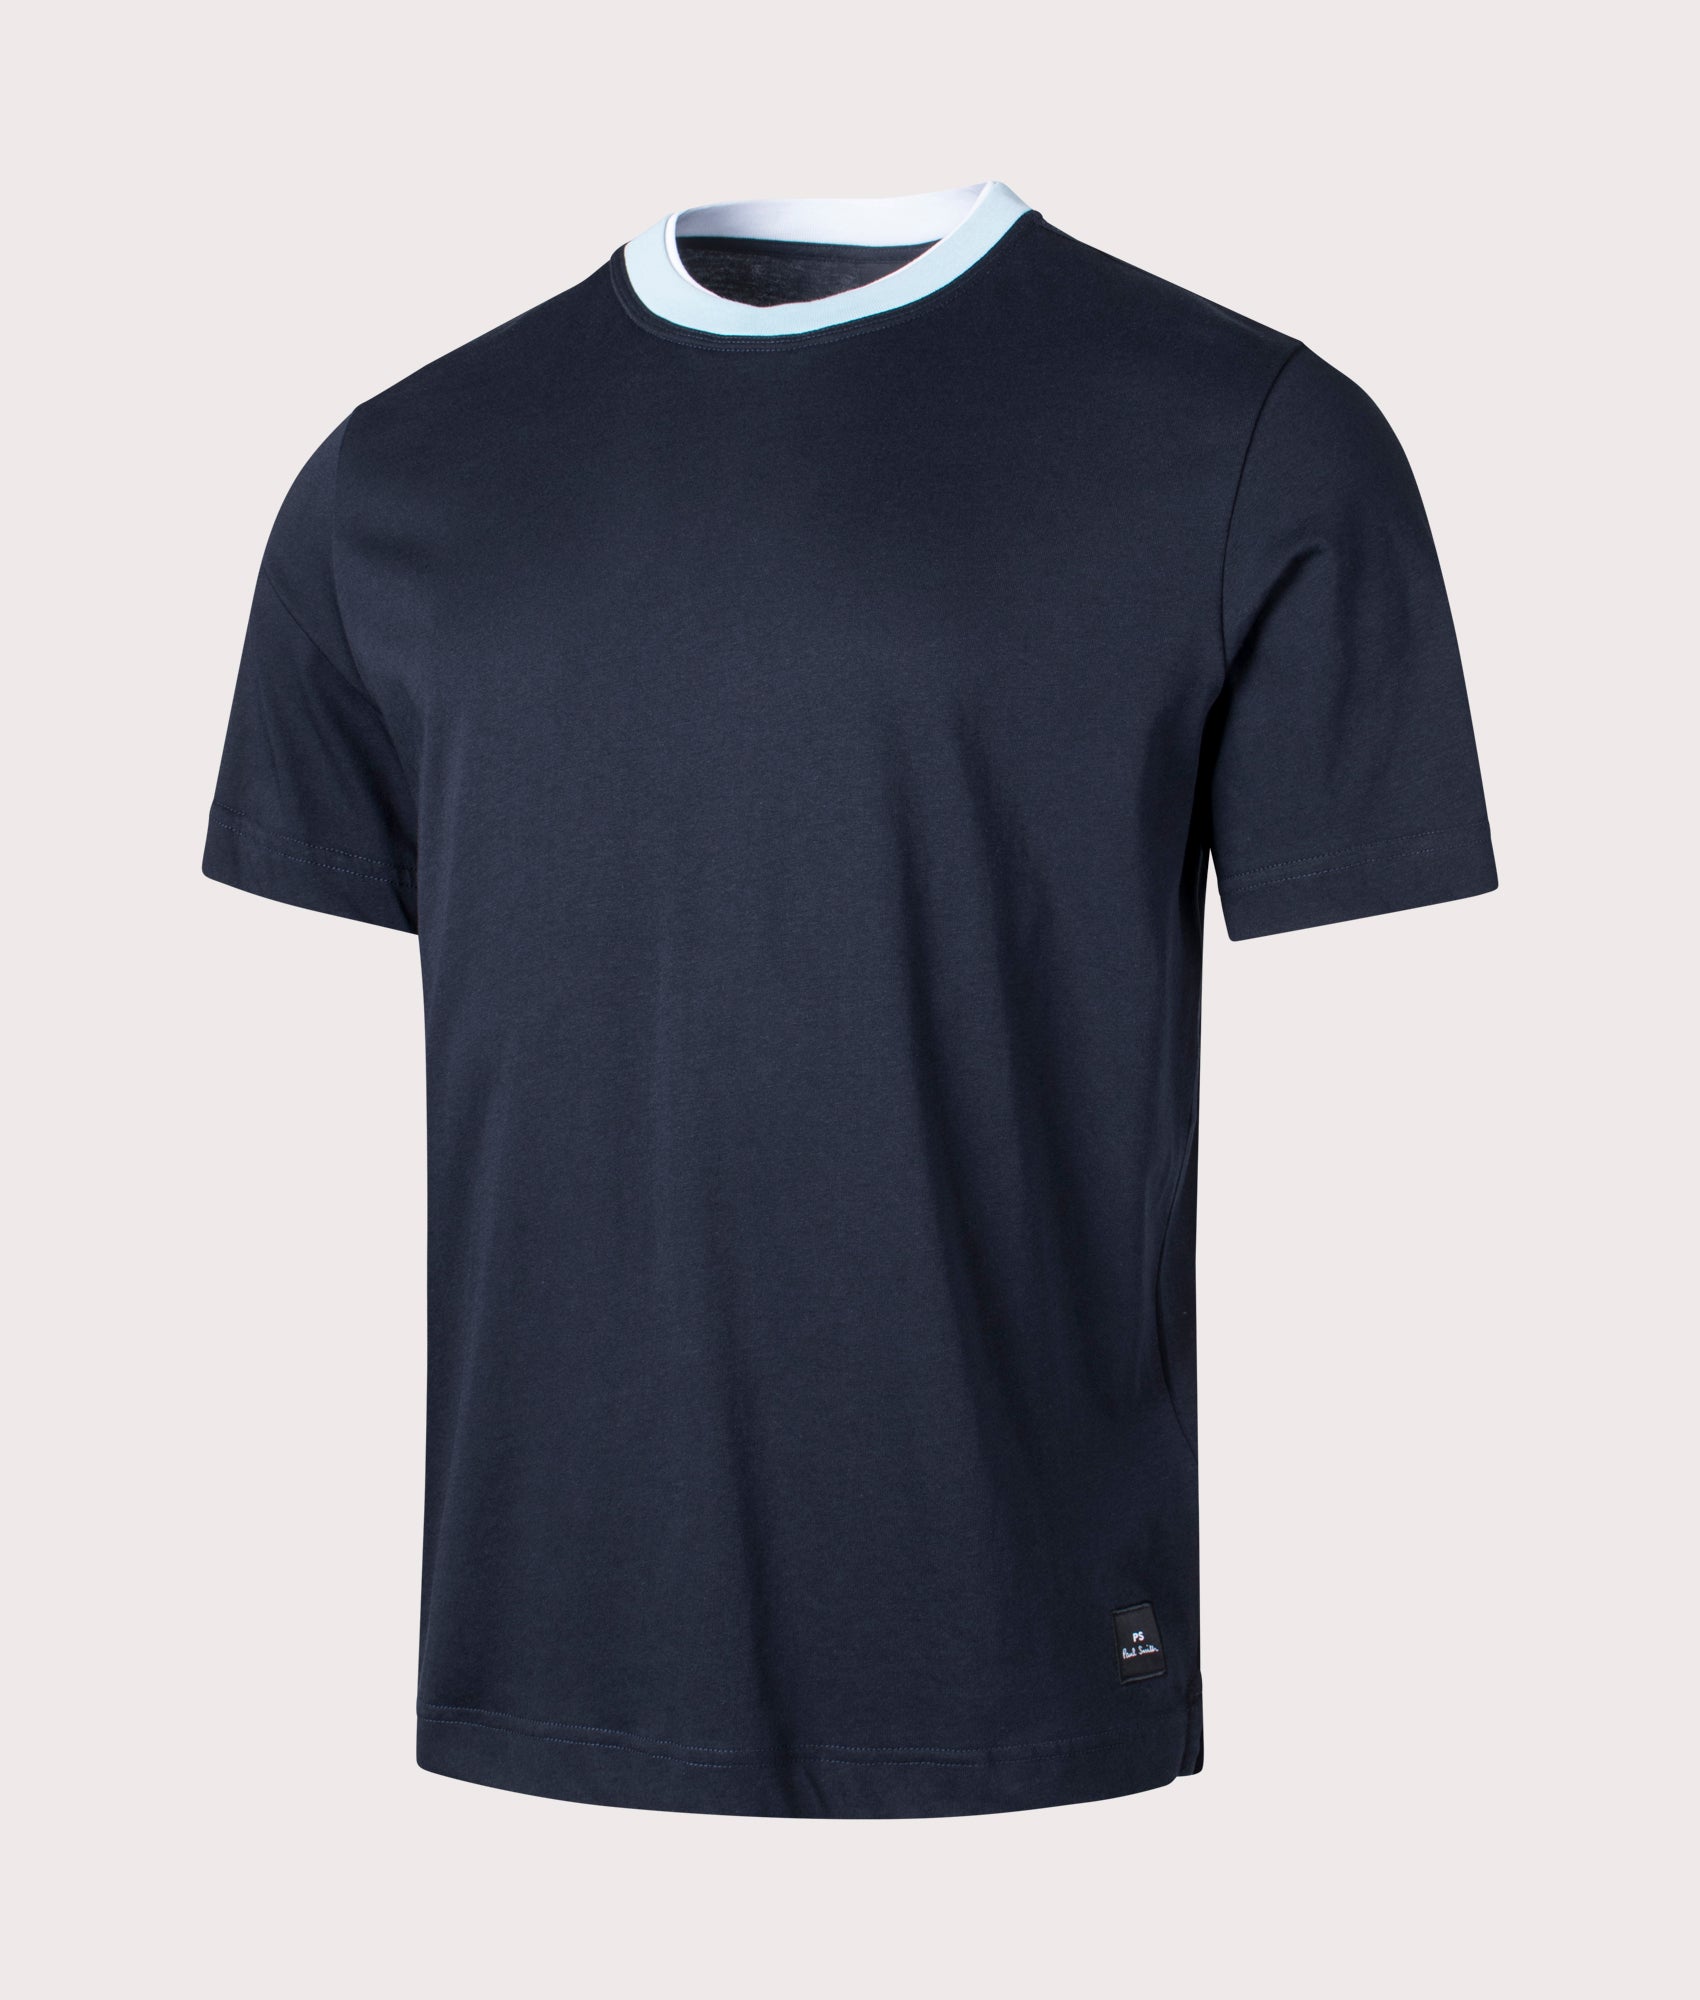 PS Paul Smith Mens Contrast Crew Neck T-Shirt - Colour: 49 Very Dark Navy - Size: XL